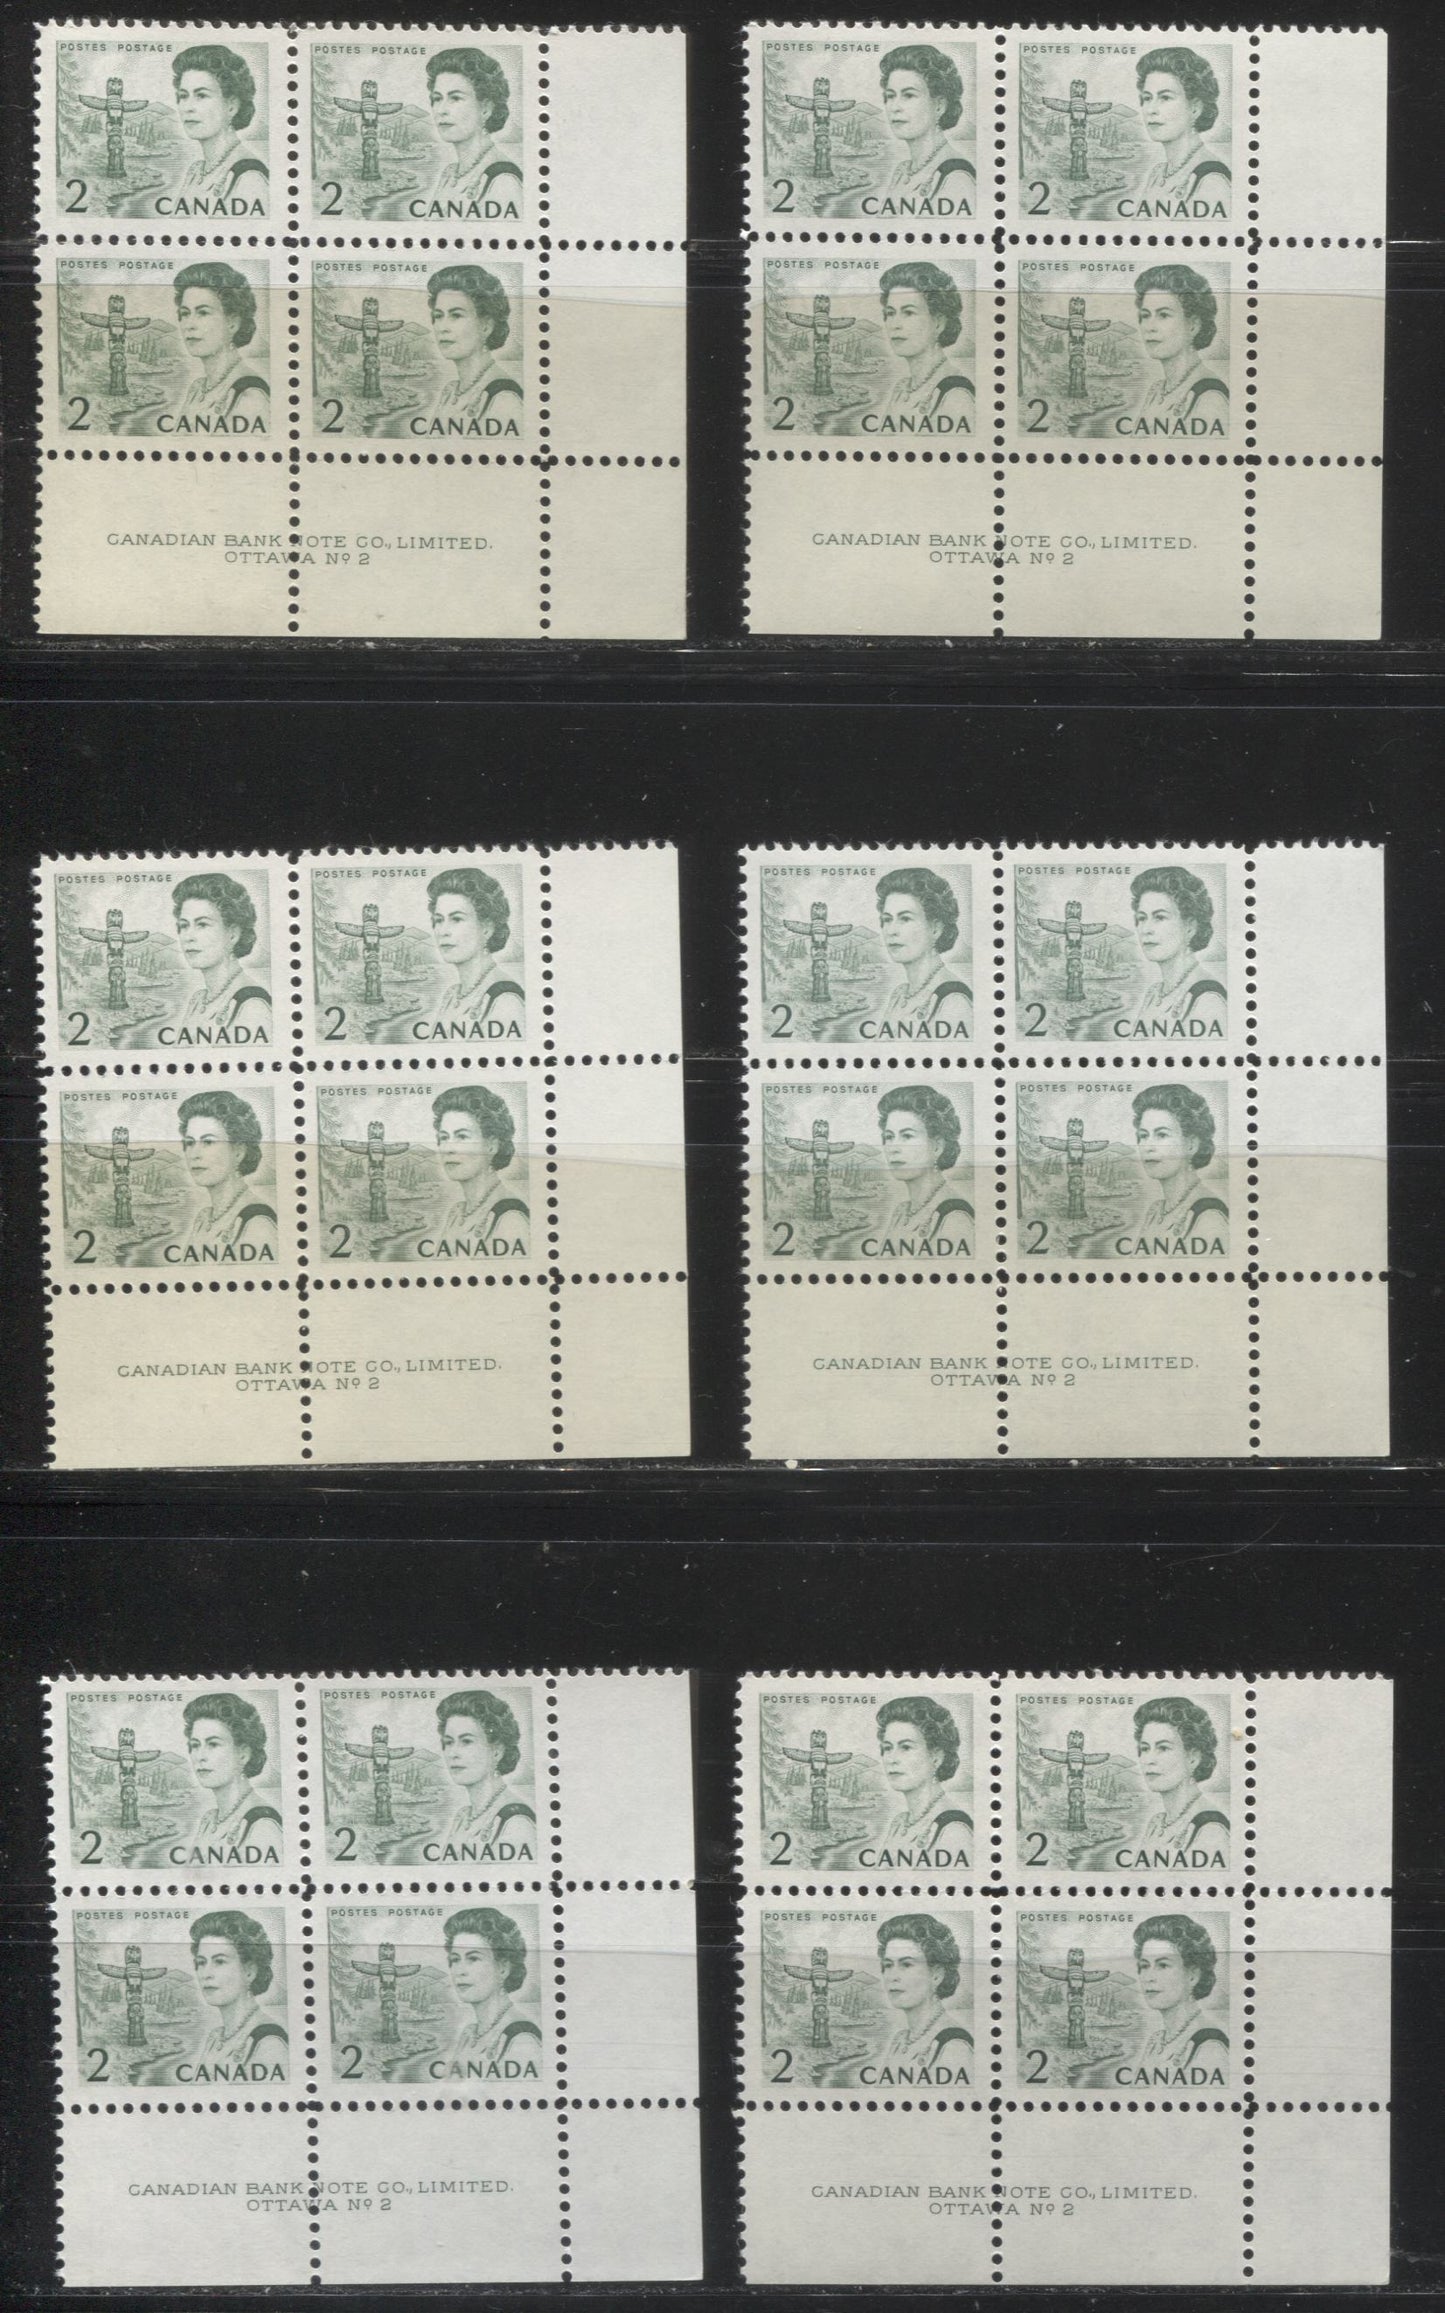 Lot #162 Canada #455, 455iv 2c Green & Deep Bright Green, Pacific Coast Totem Pole, 1967-1973 Centennial Issue, A Specialized Lot of Plate 2 LR Blocks on DF and NF Papers